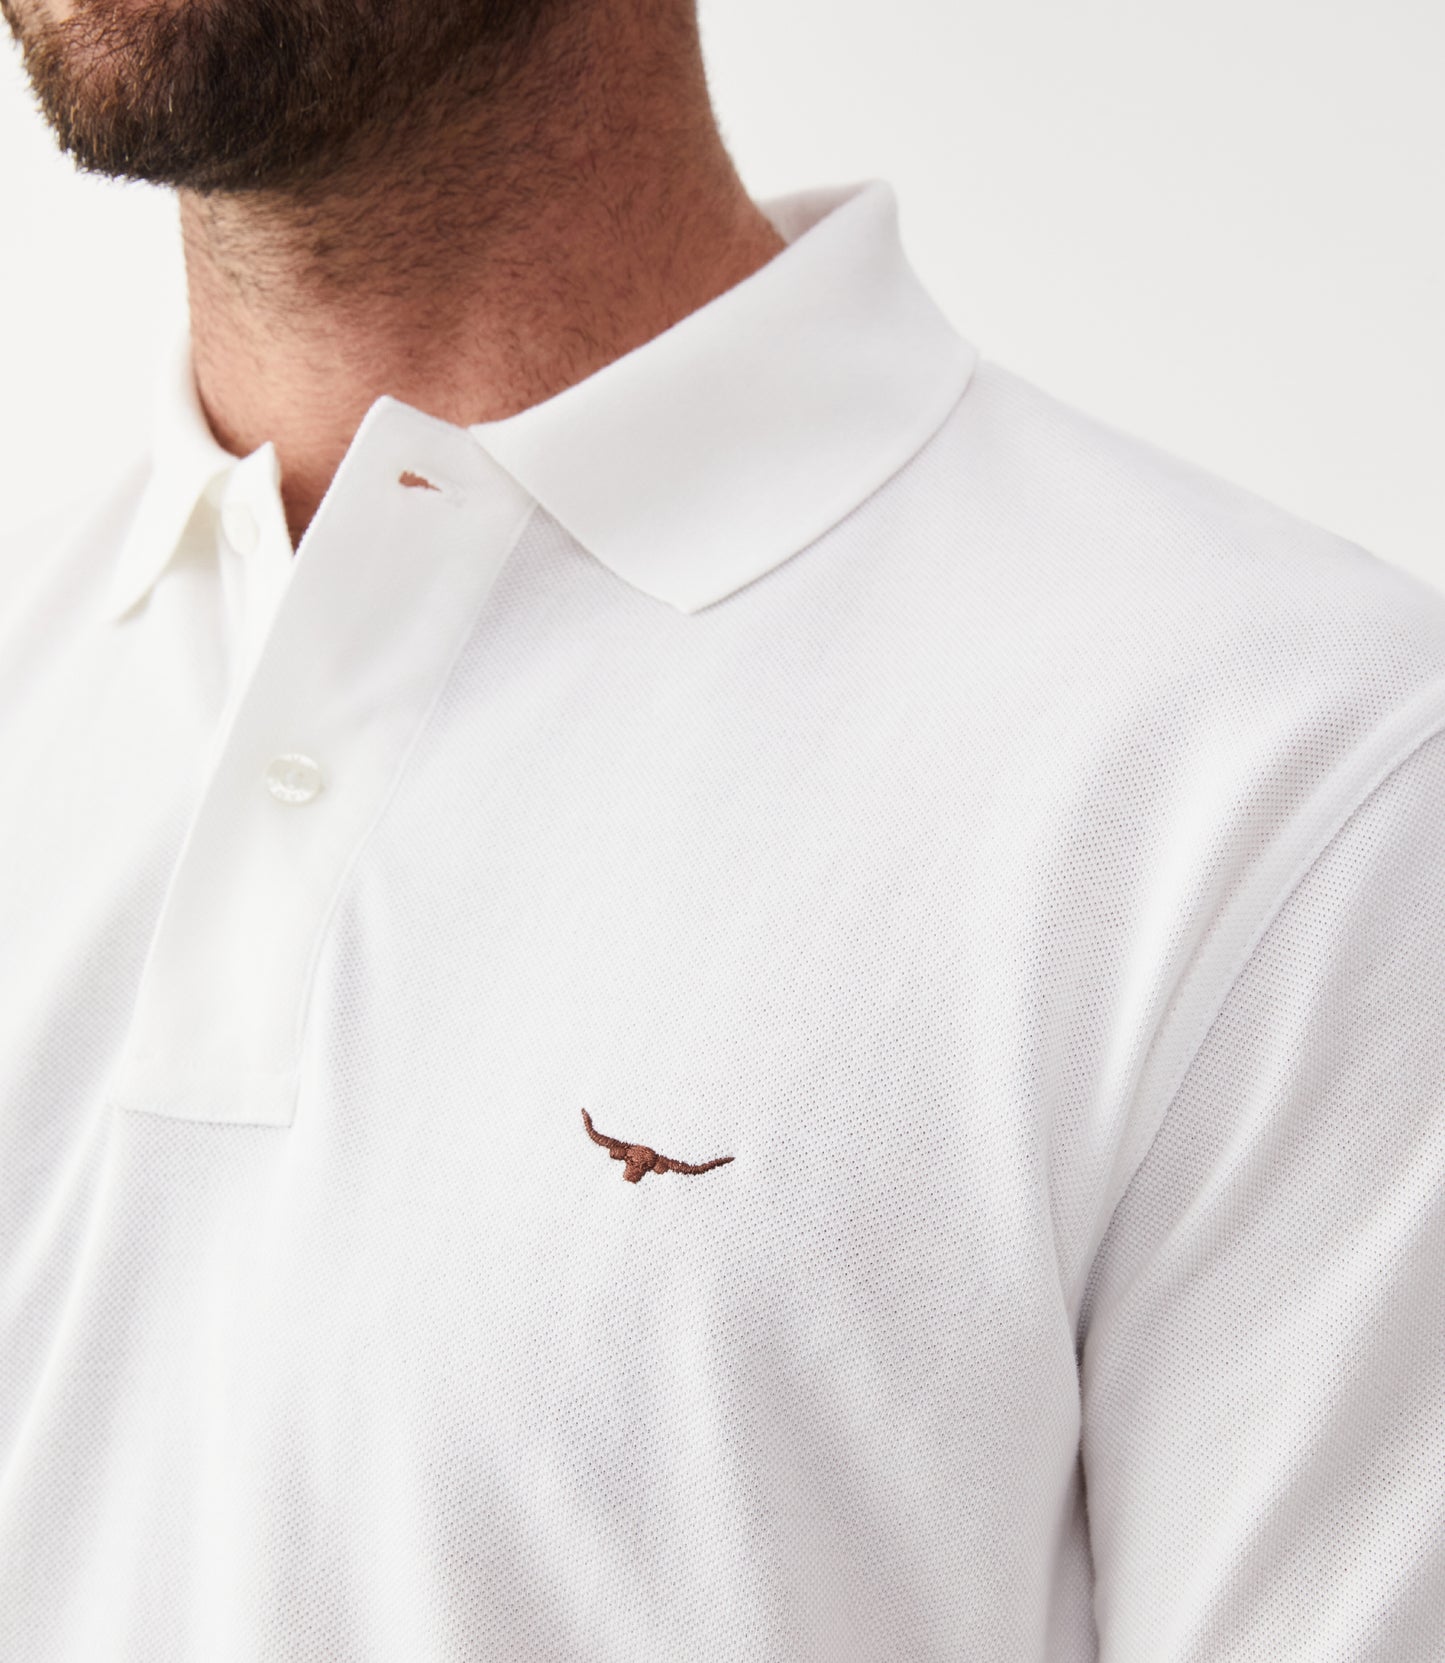 R.M Williams Polo Shirts, The Rod Polo in White